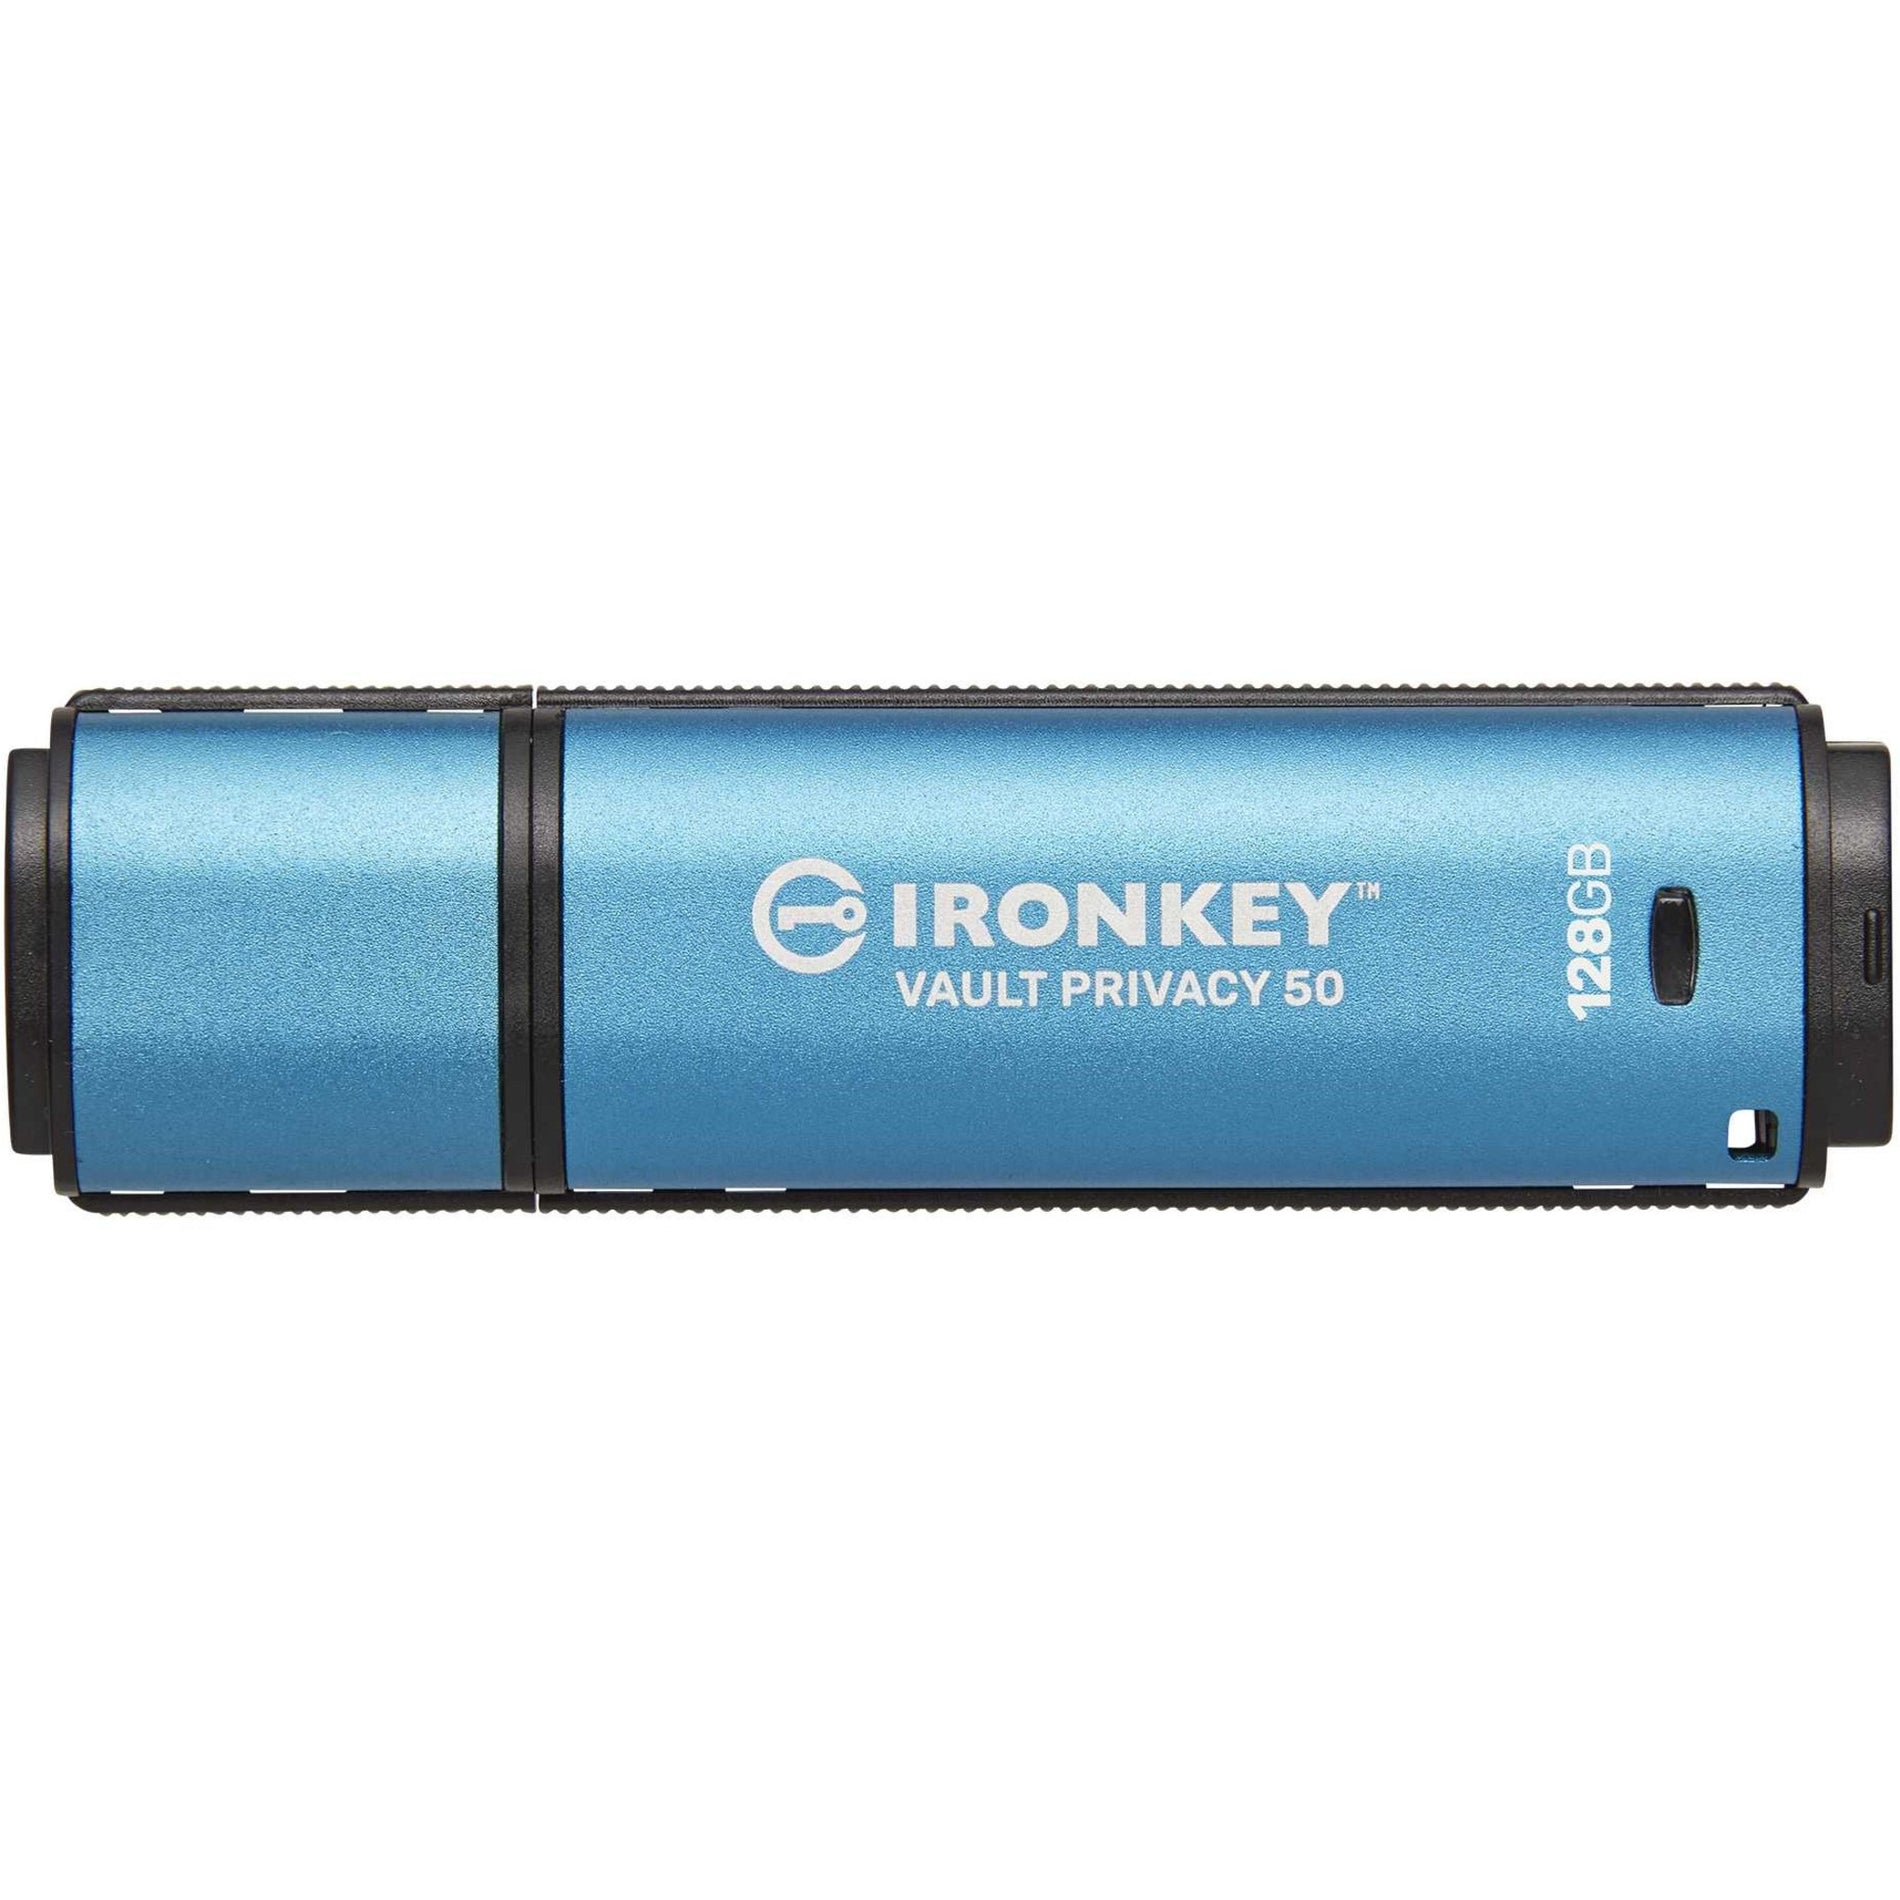 IronKey IKVP50/128GB Vault Privacy 50 Series 128GB USB 3.2 (Gen 1) Type A Flash Drive, Password Protection, 256-bit AES Encryption